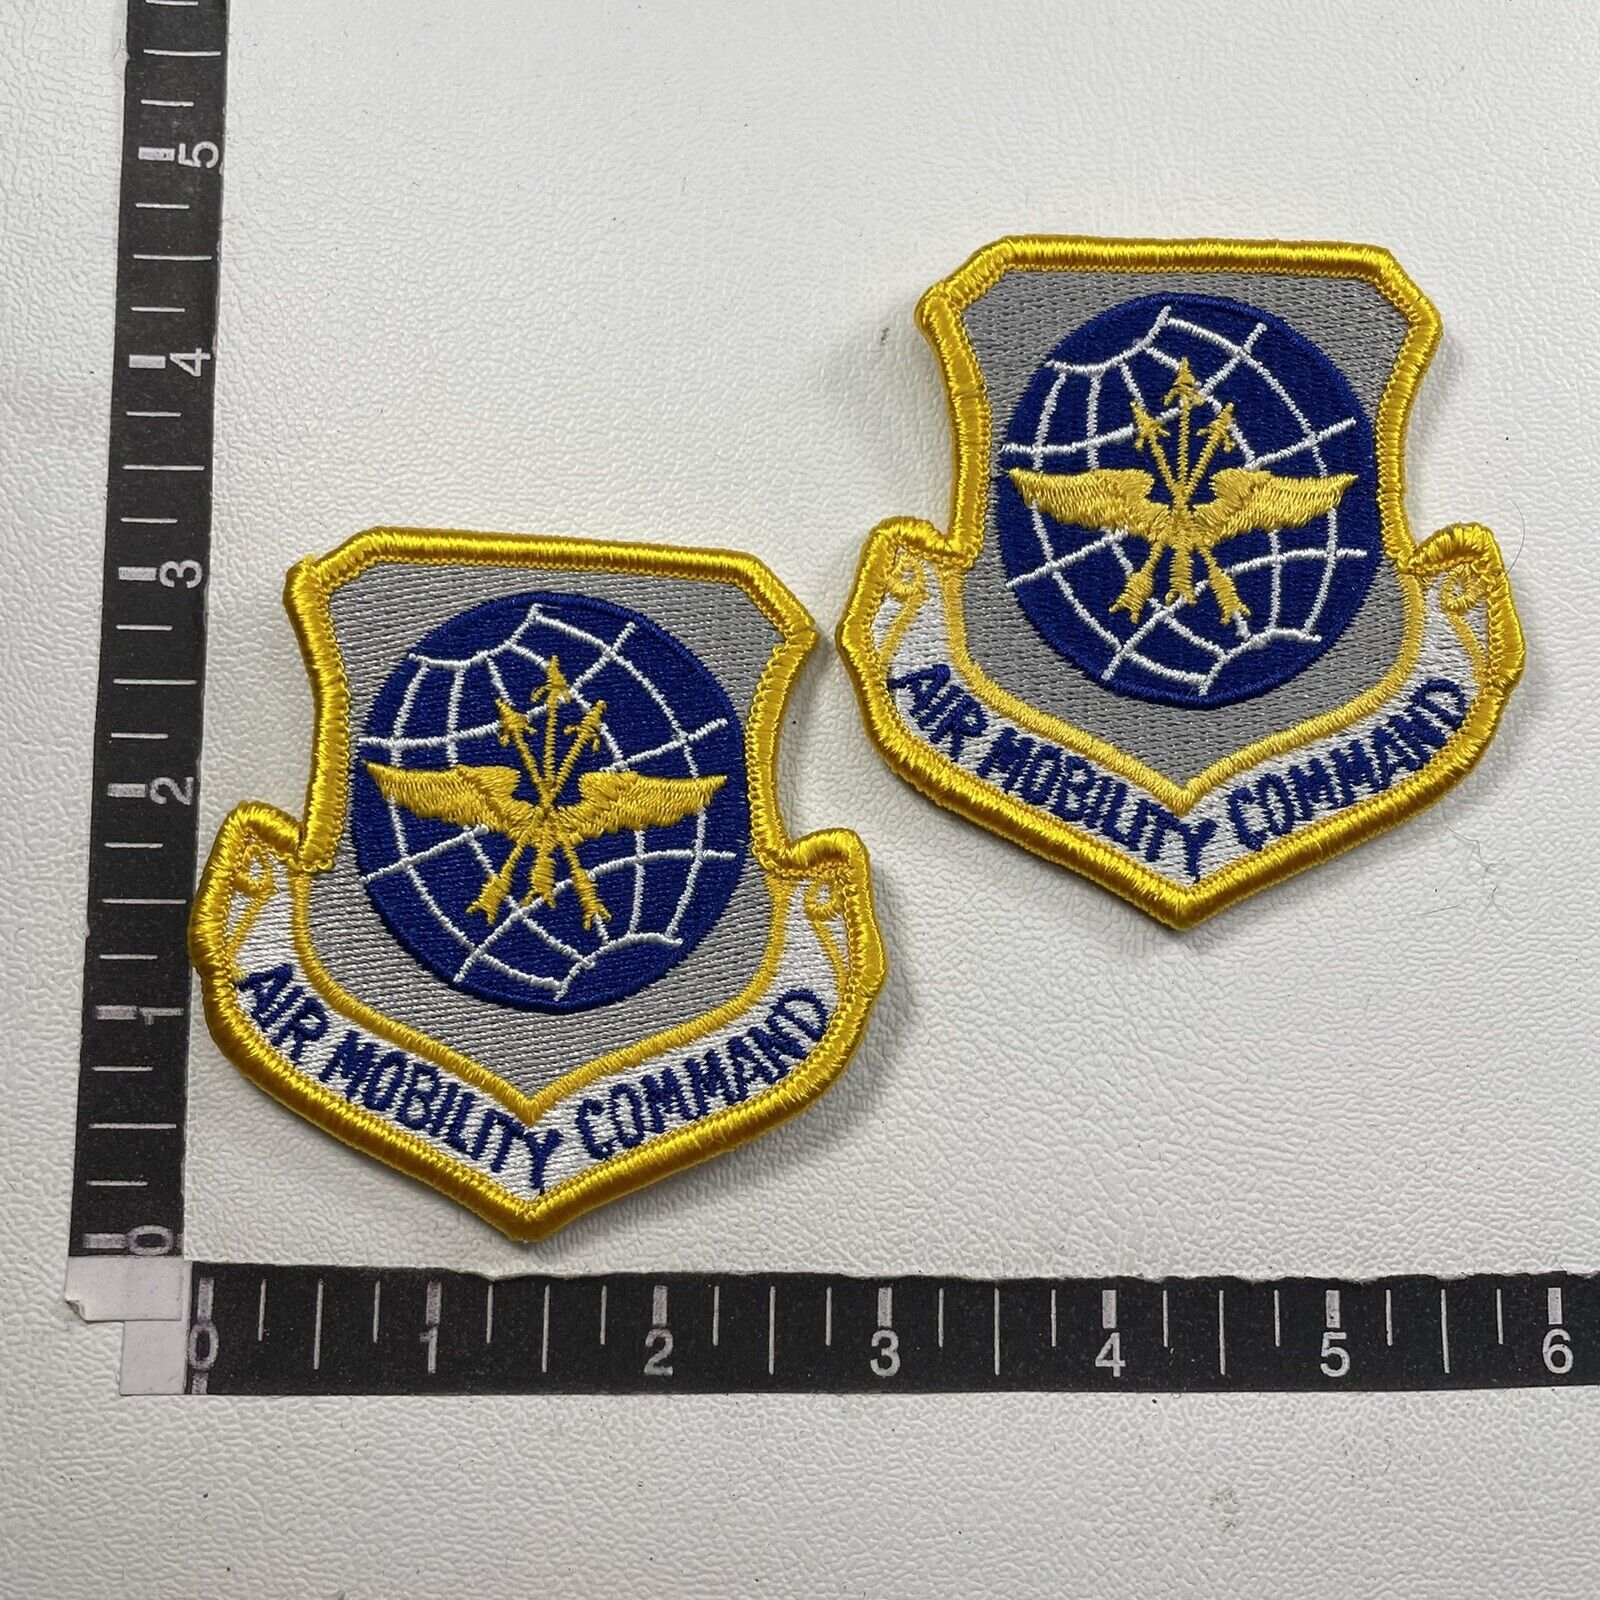 Vtg 1990s USAF US AIR FORCE AIR MOBILITY COMMAND 2 PATCHES (Hook & Loop) 00WT